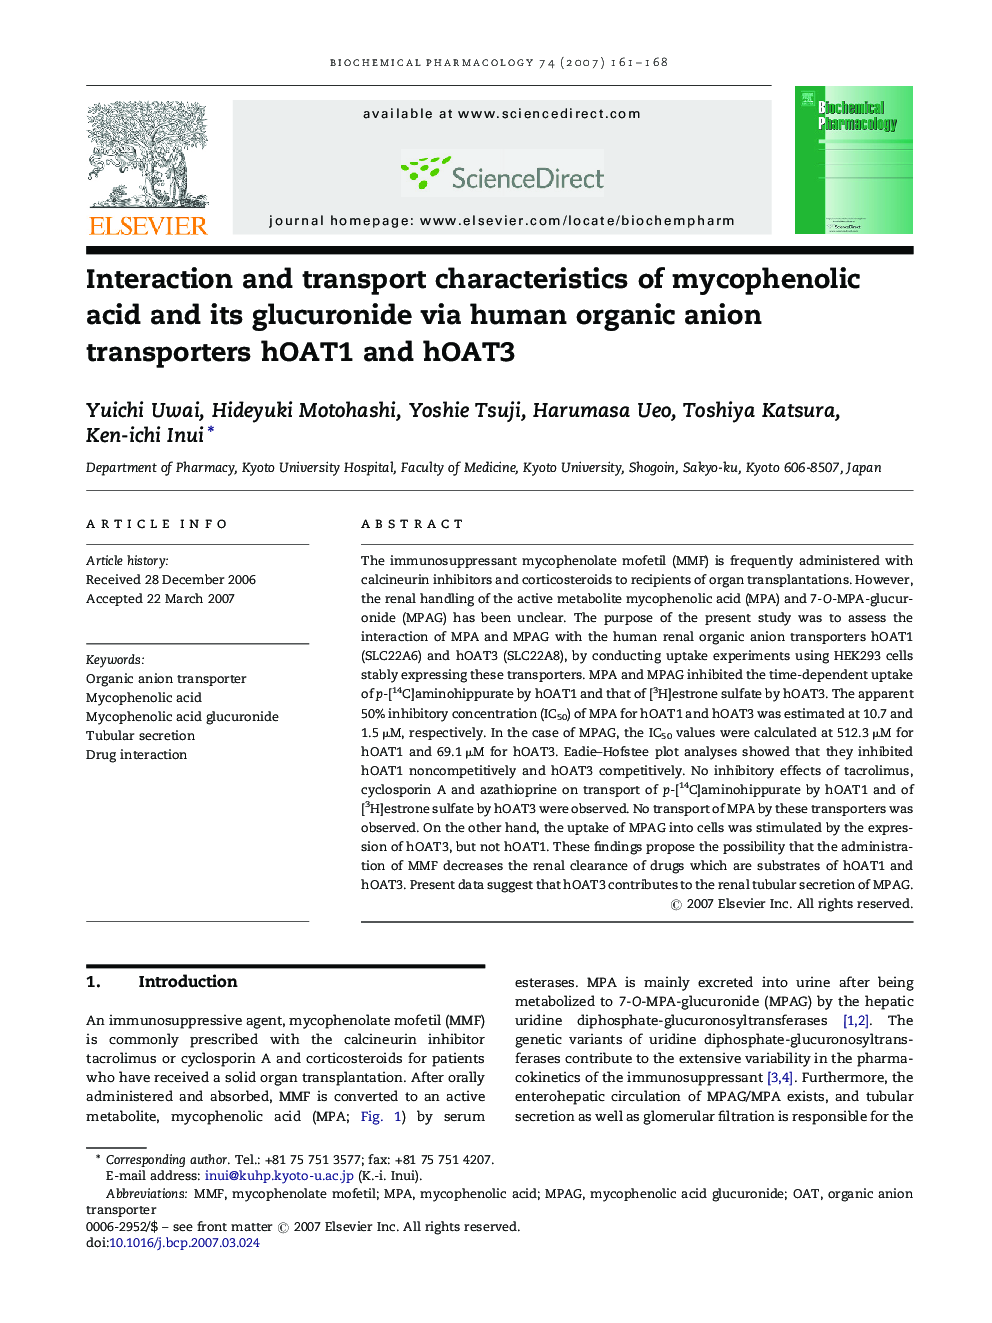 Interaction and transport characteristics of mycophenolic acid and its glucuronide via human organic anion transporters hOAT1 and hOAT3